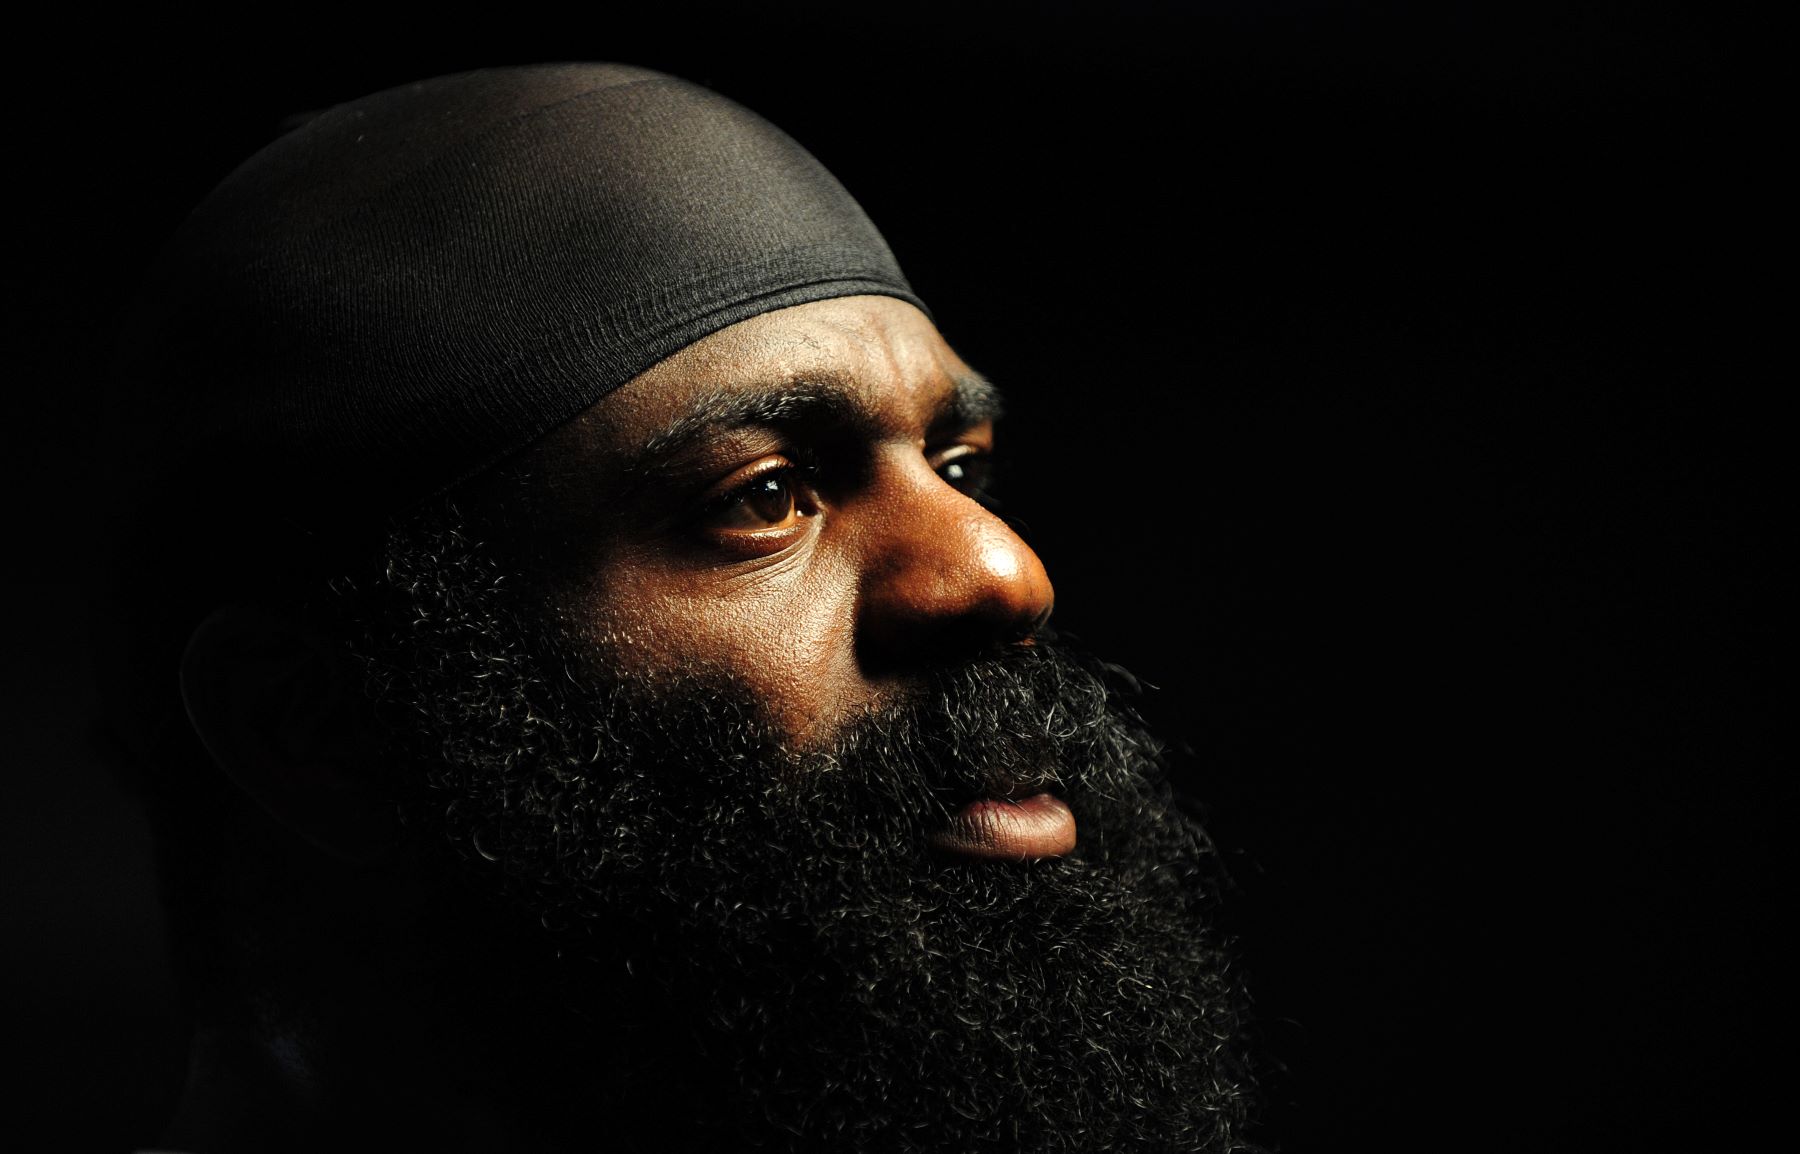 MMA heavyweight Kimbo Slice photographed at the Legends Mixed Martial Arts Training Center where he appeared alongside Gina Carano